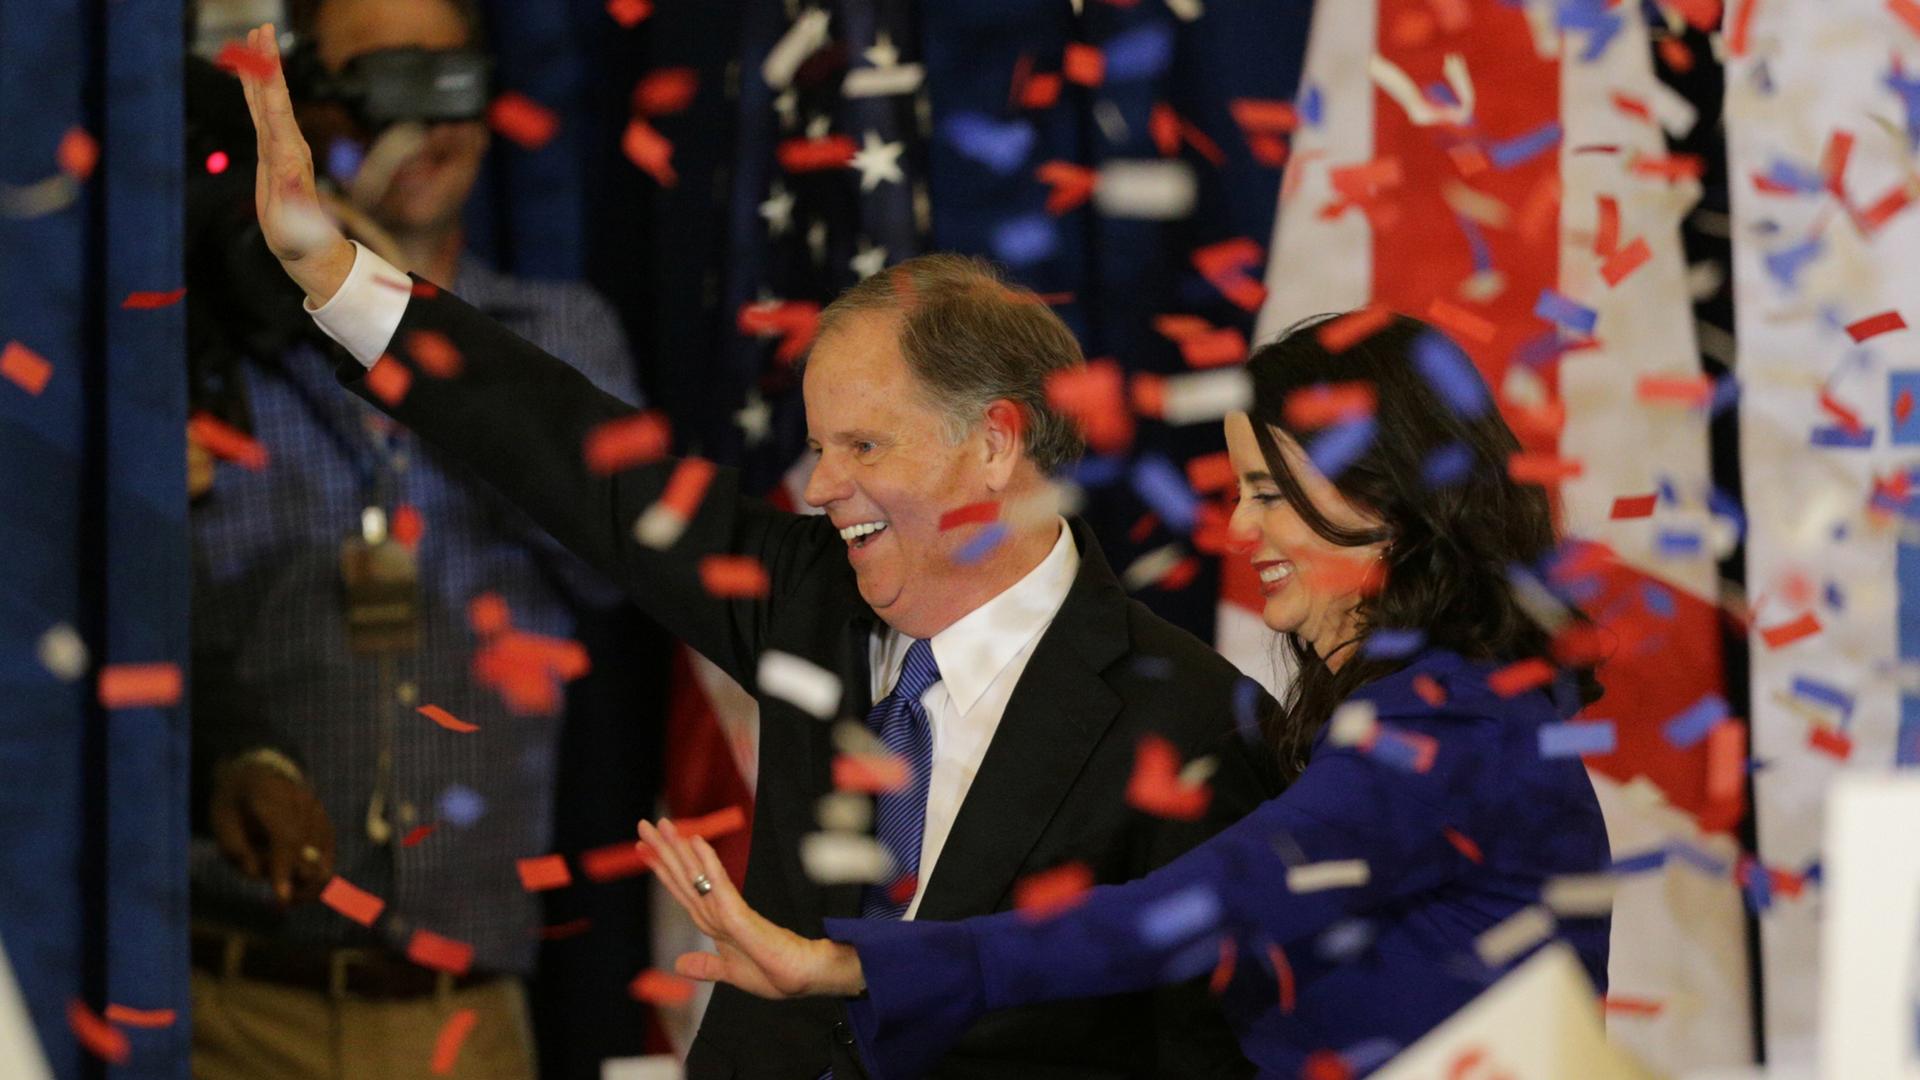 Democratic Alabama US Senate candidate Doug Jones and wife Louise smile and celebrate as red, white and blue confetti falls.